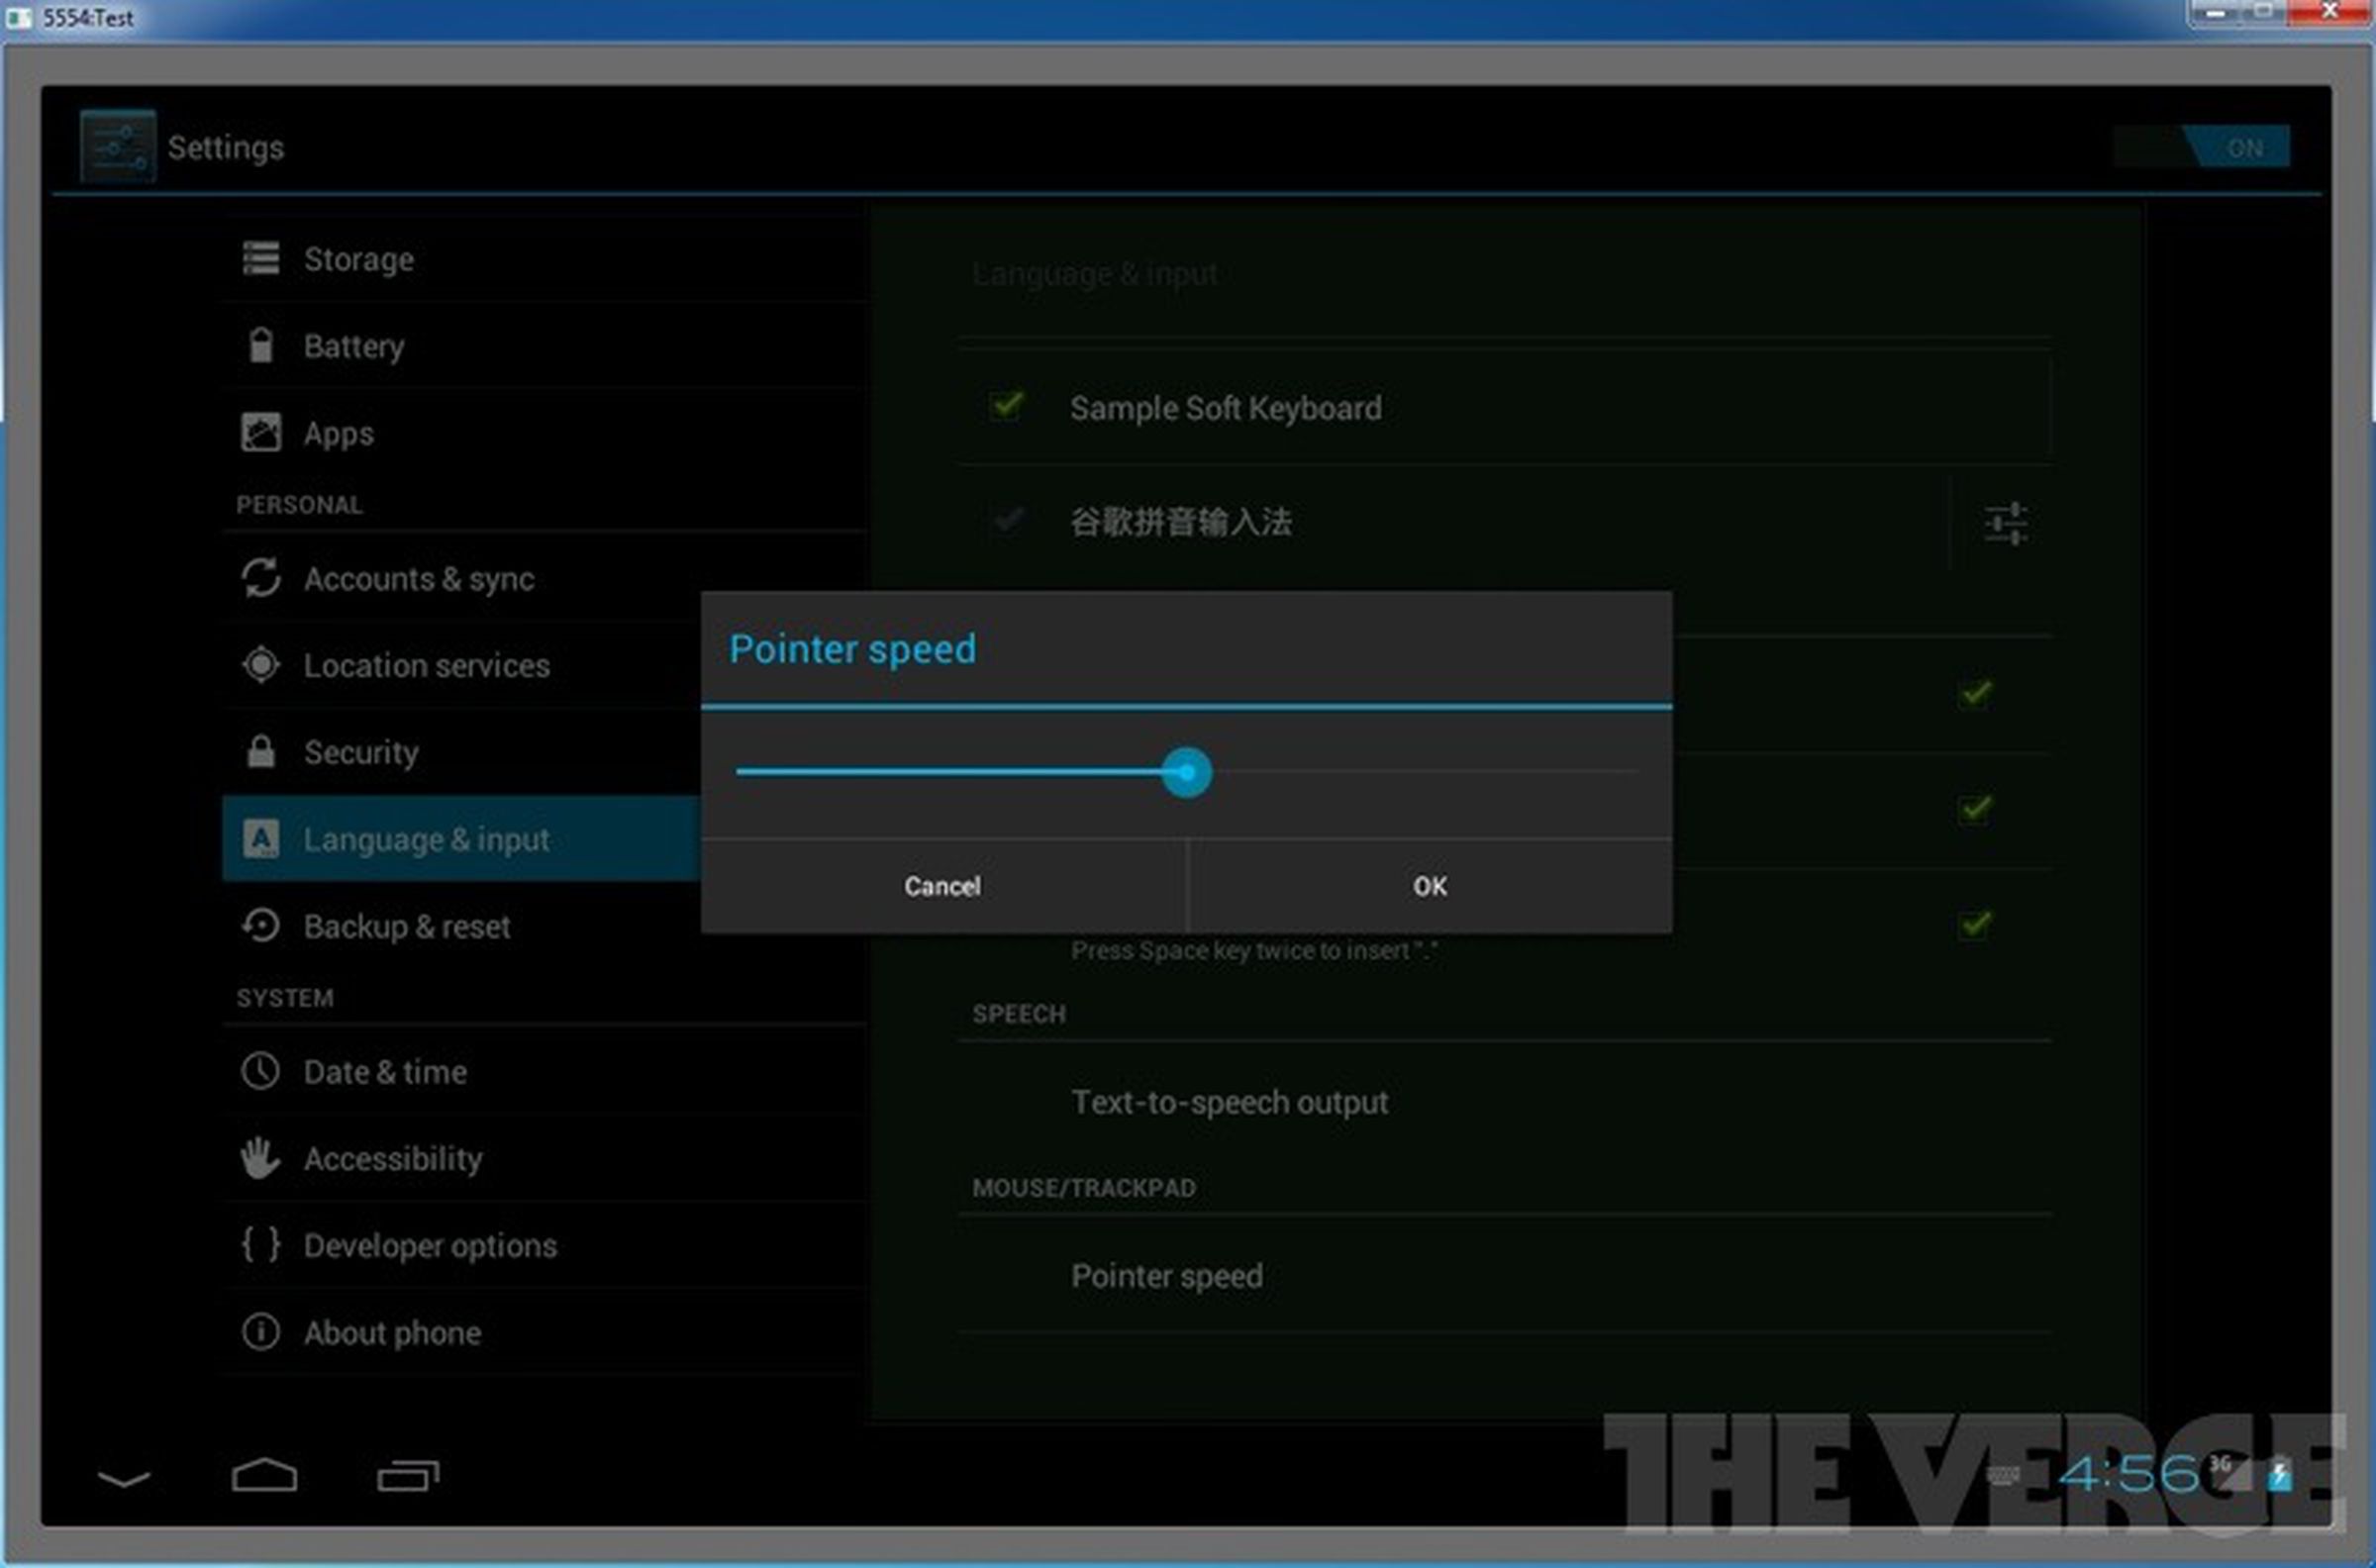 Android 4.0 Ice Cream Sandwich on a tablet, one screenshot at a time